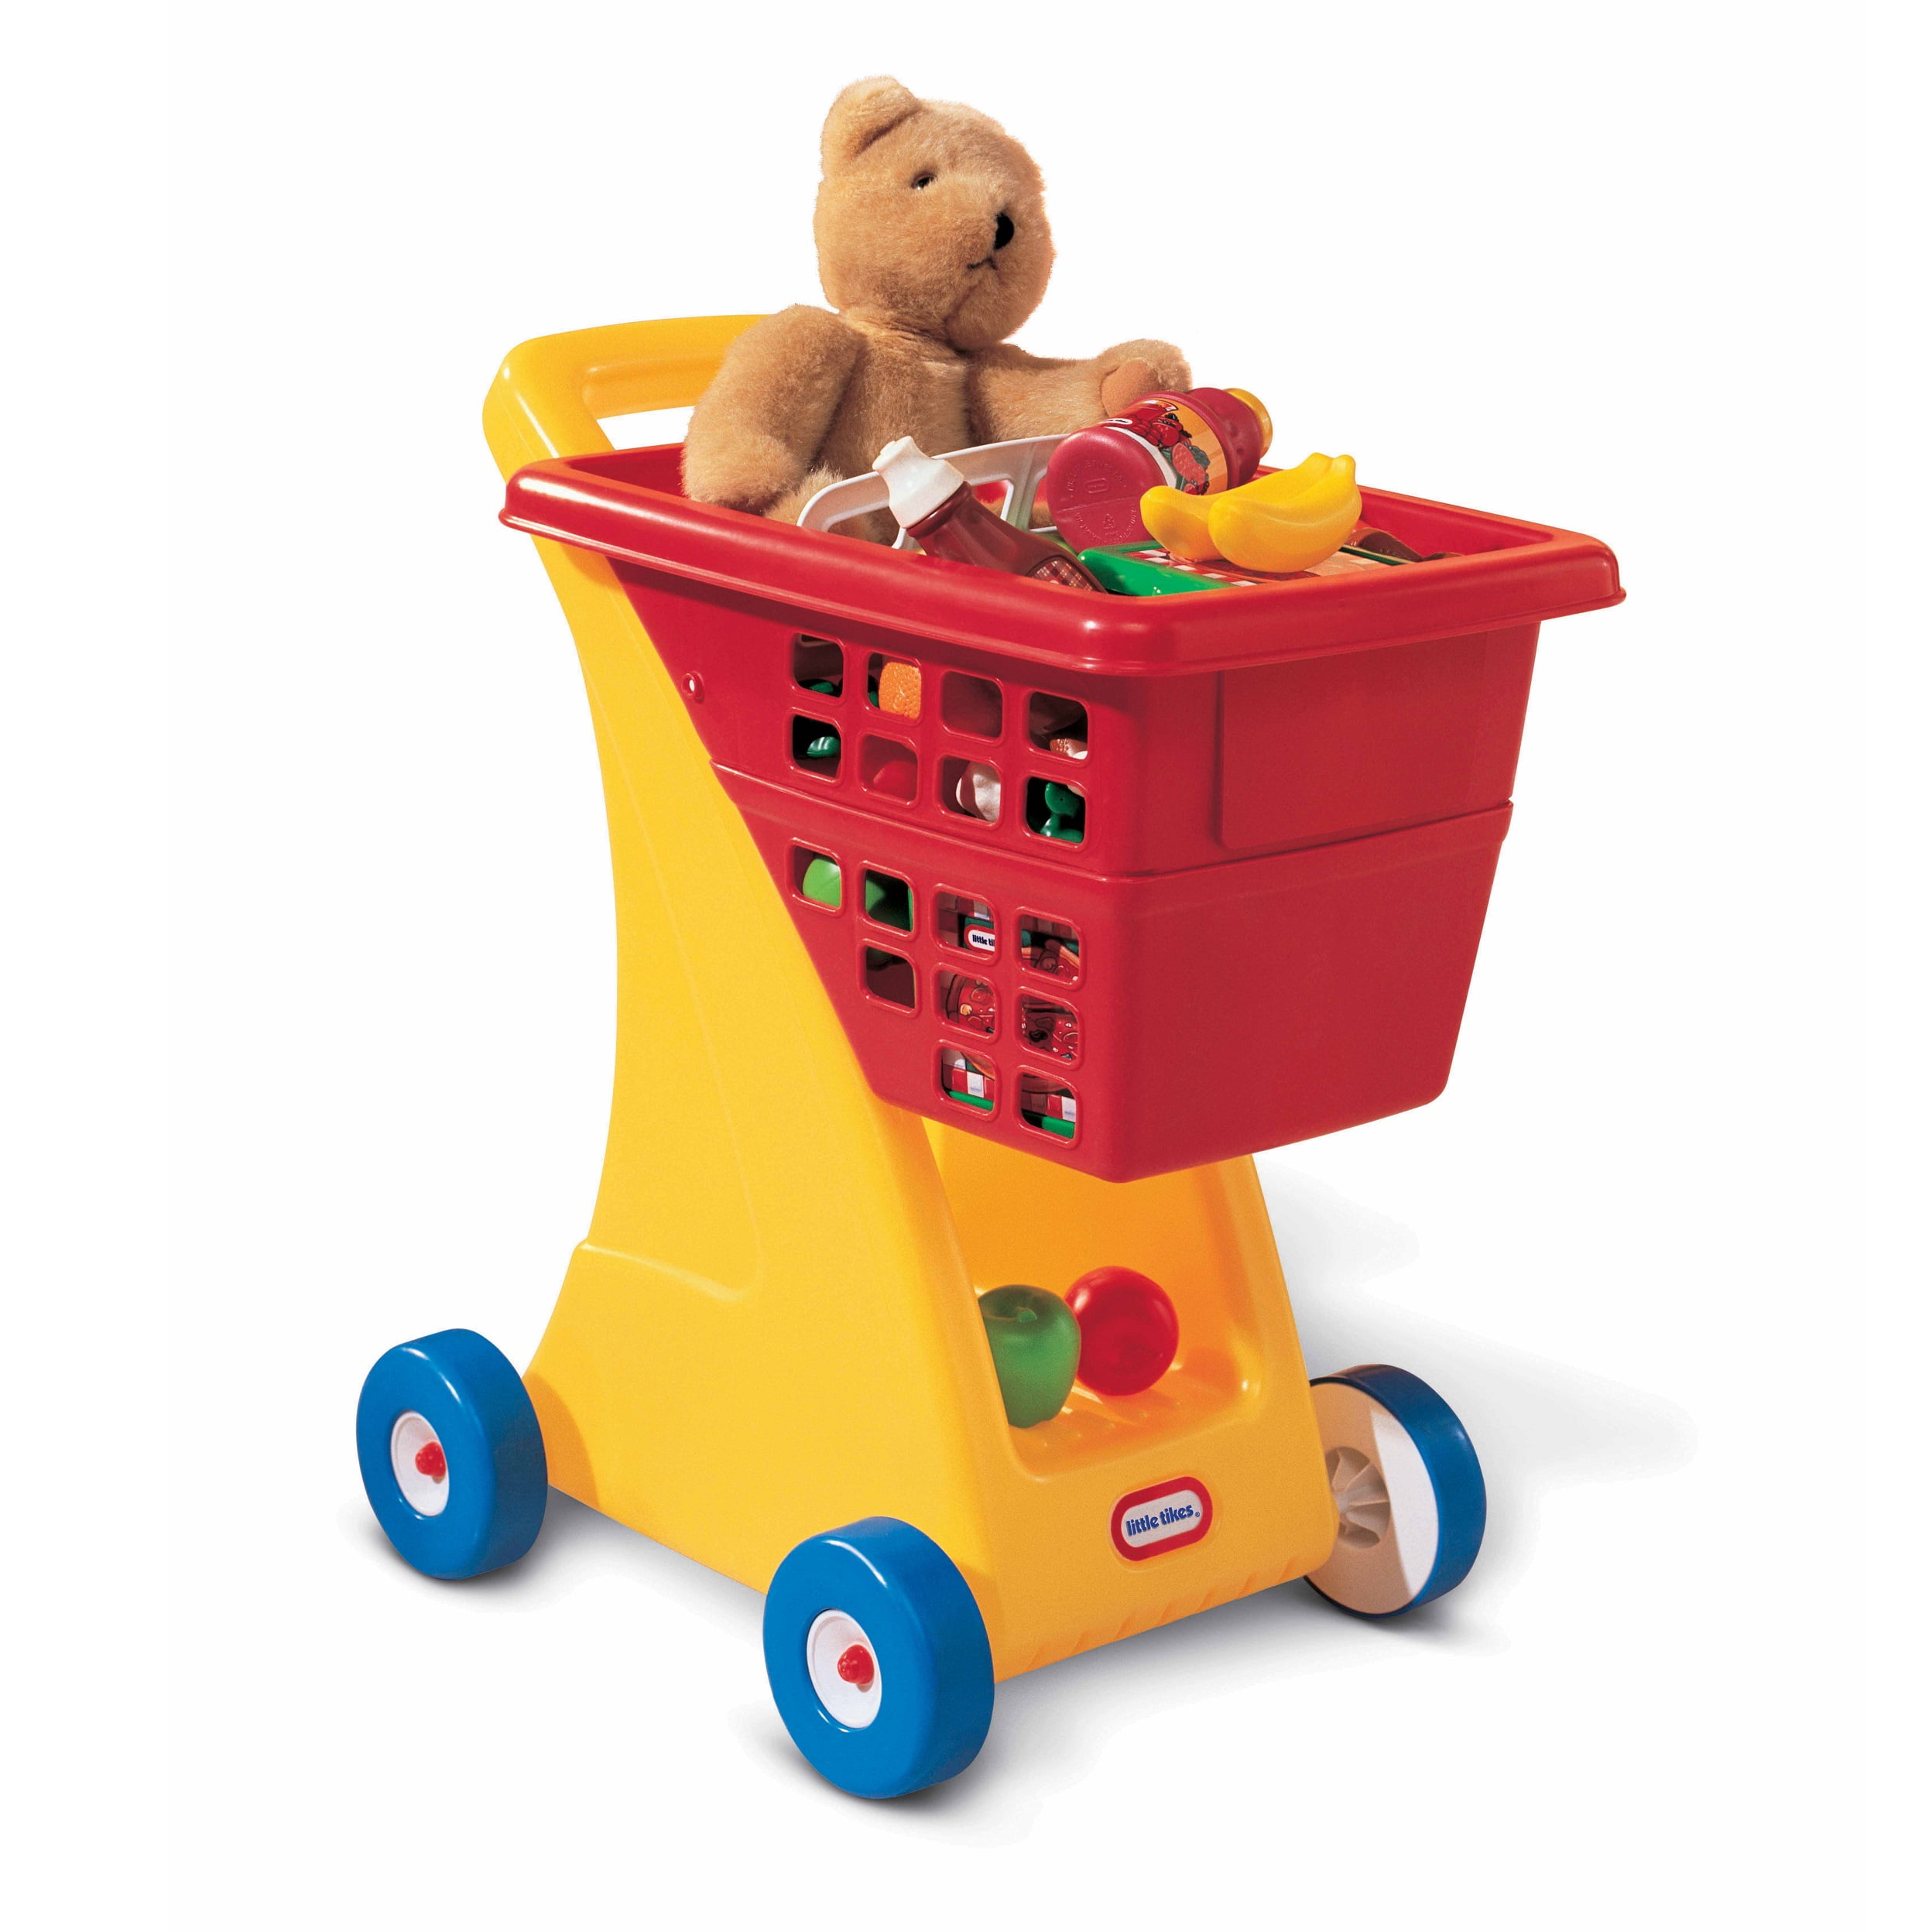 Toy Shopping Cart Toy for Toddlers Grocery Cart for Kids Shopping Cart Ages 18+ 